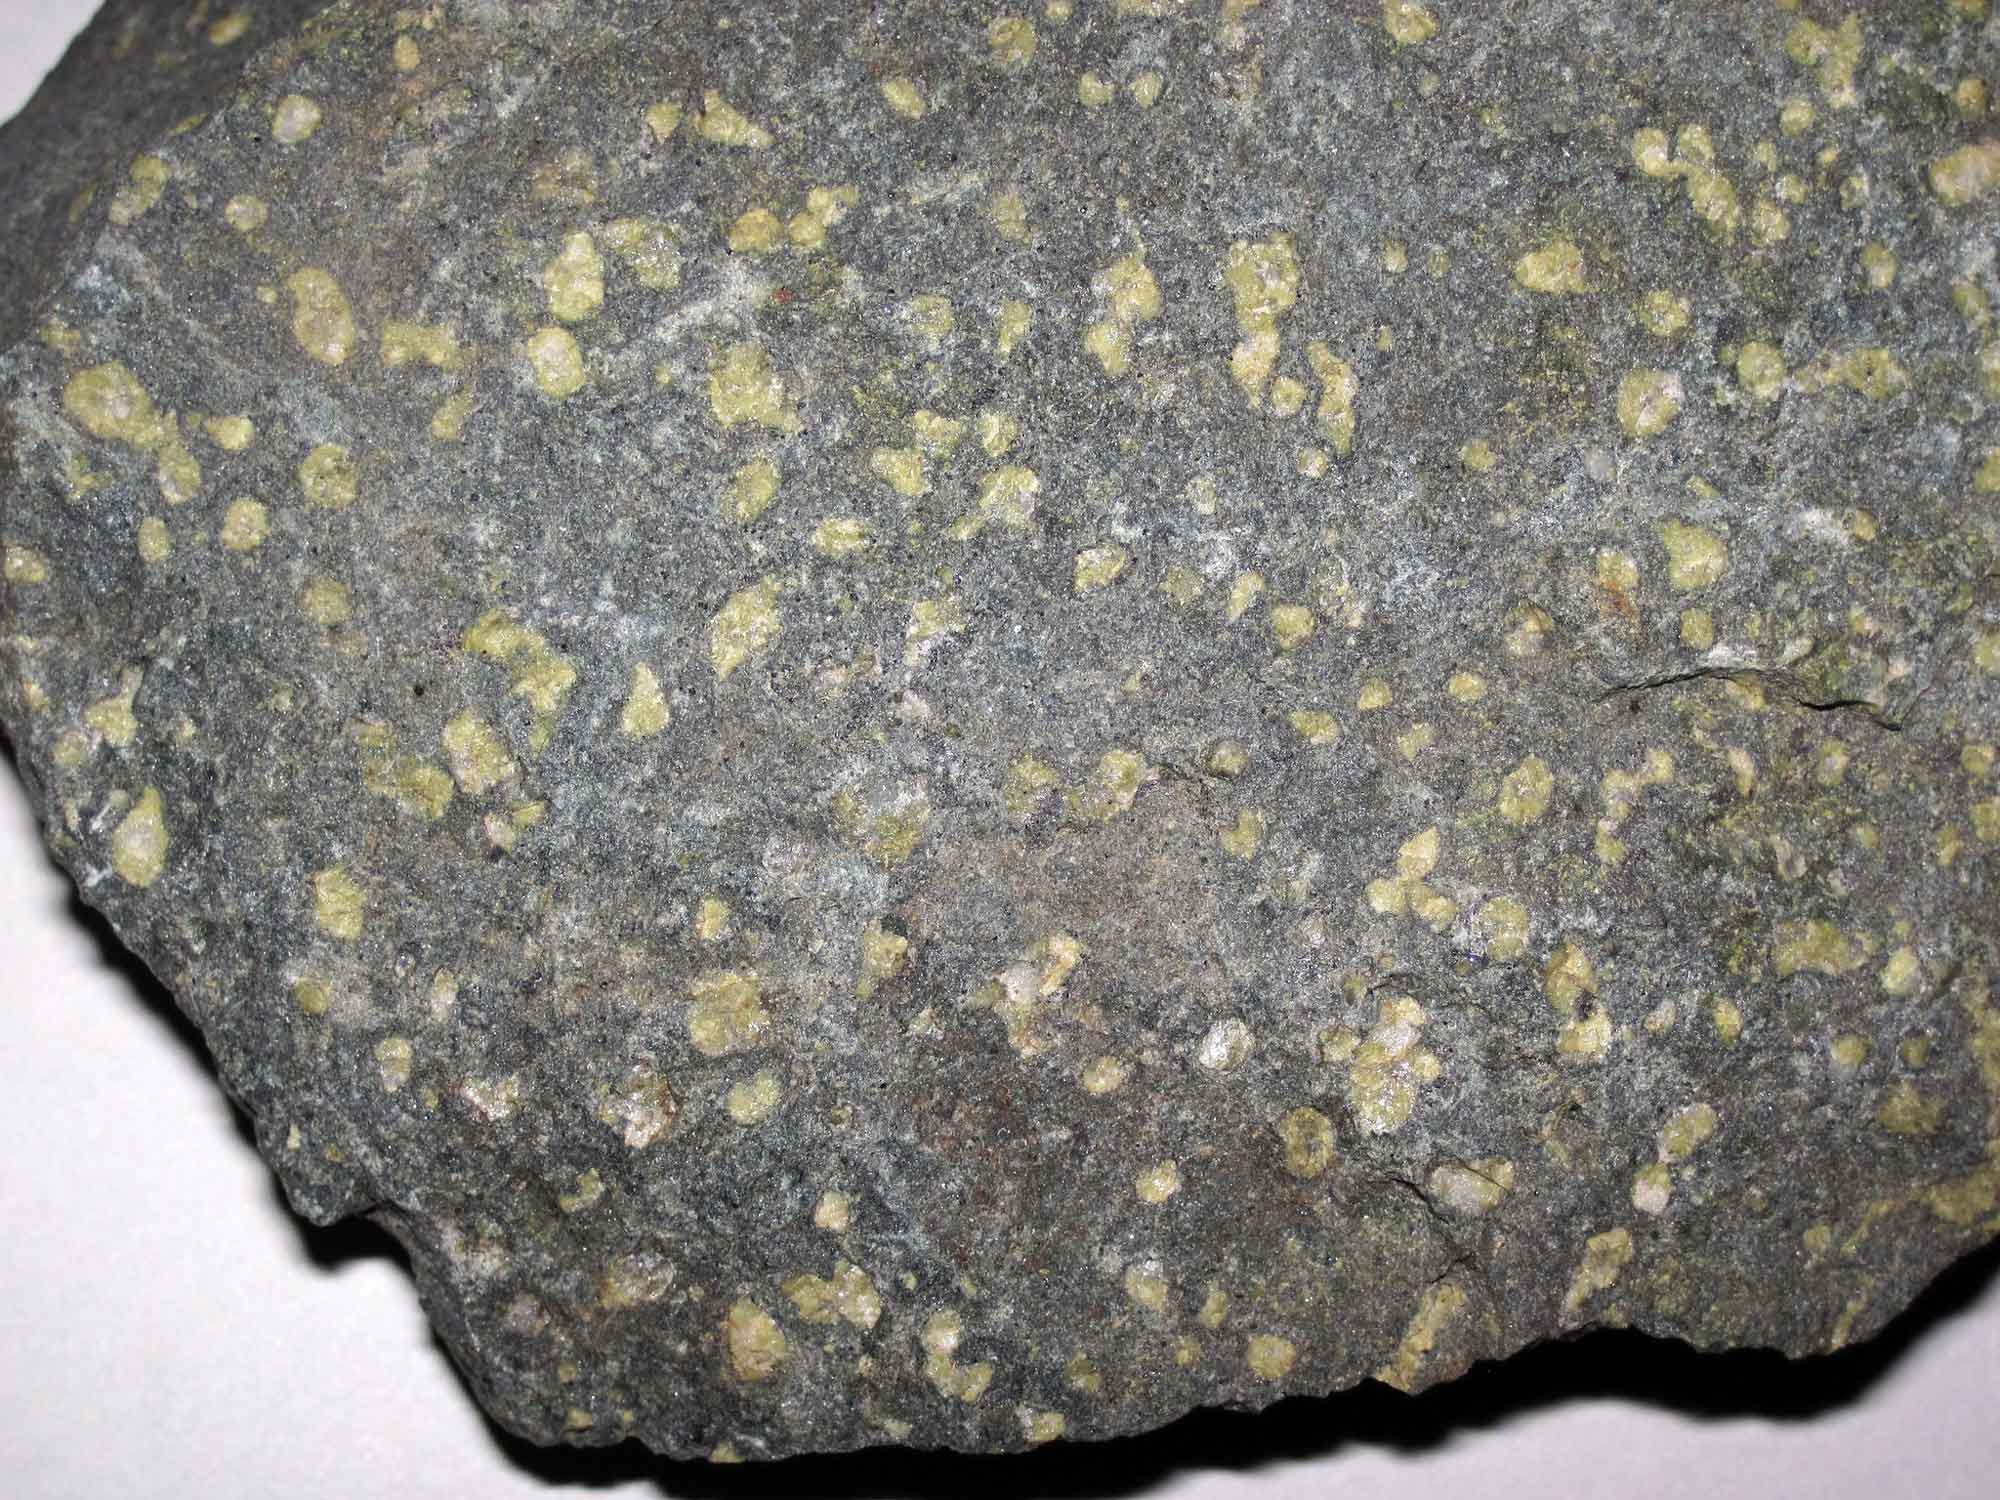 Photograph of a sample of Catoctin Formation greenstone.